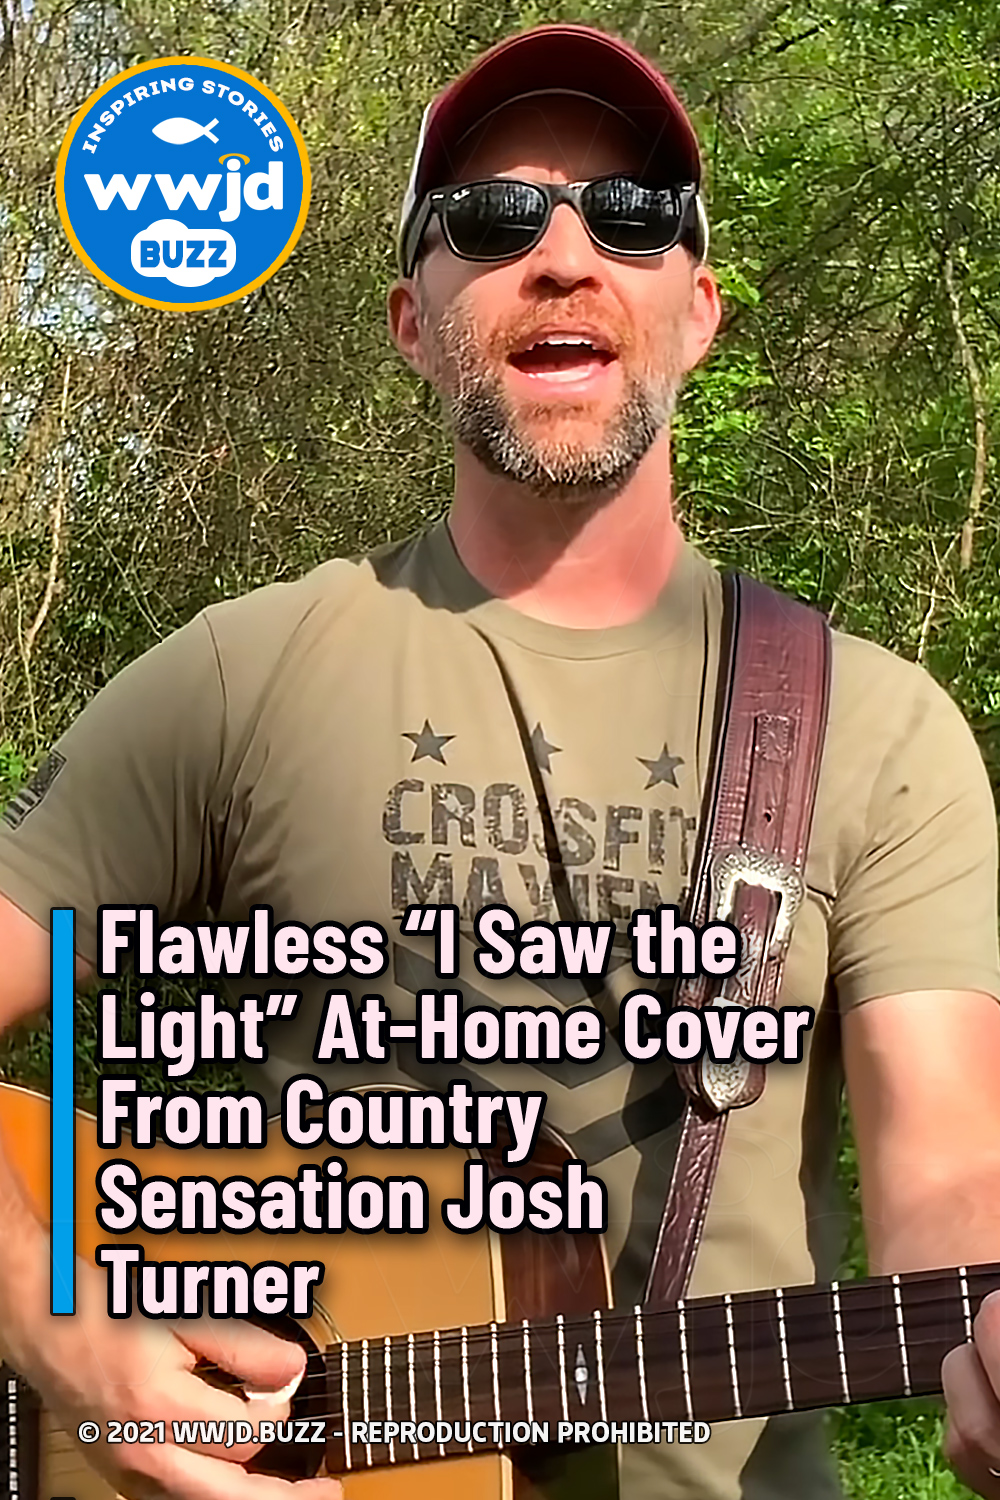 Flawless “I Saw the Light” At-Home Cover From Country Sensation Josh Turner